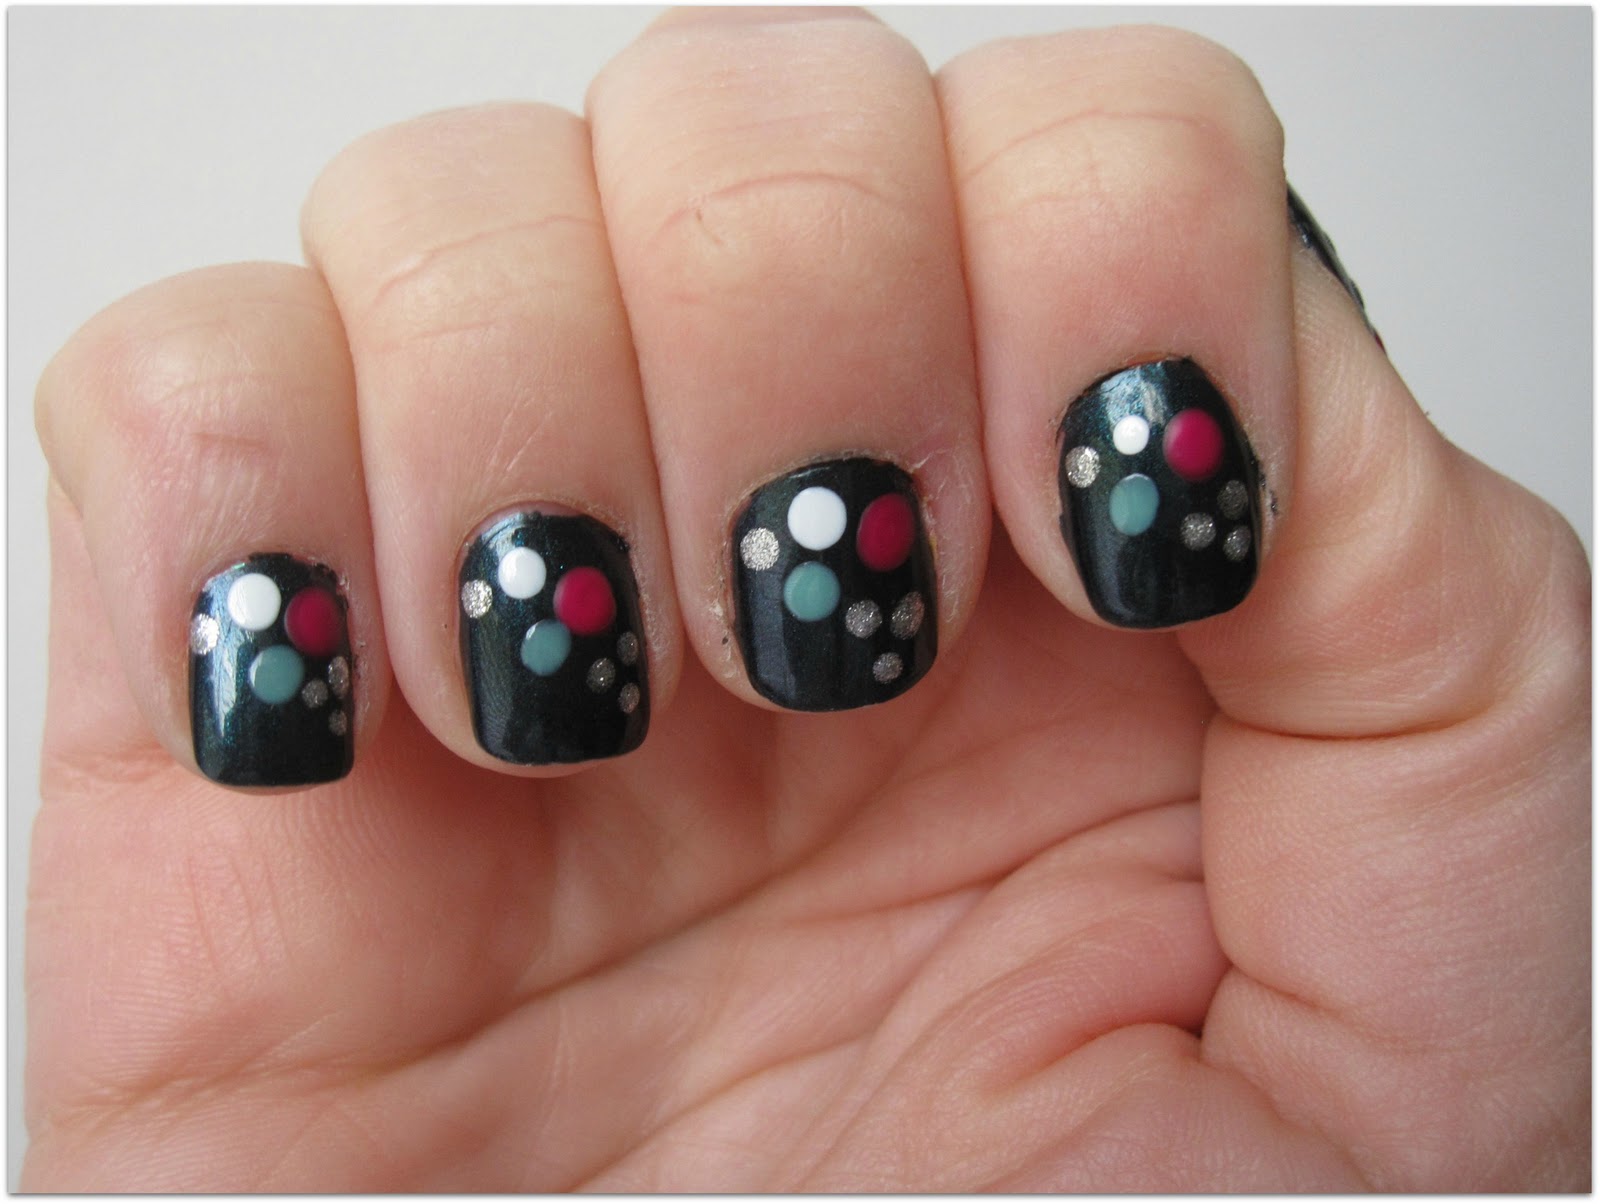 3. How to Create a Polka Dot Manicure at Home - wide 6